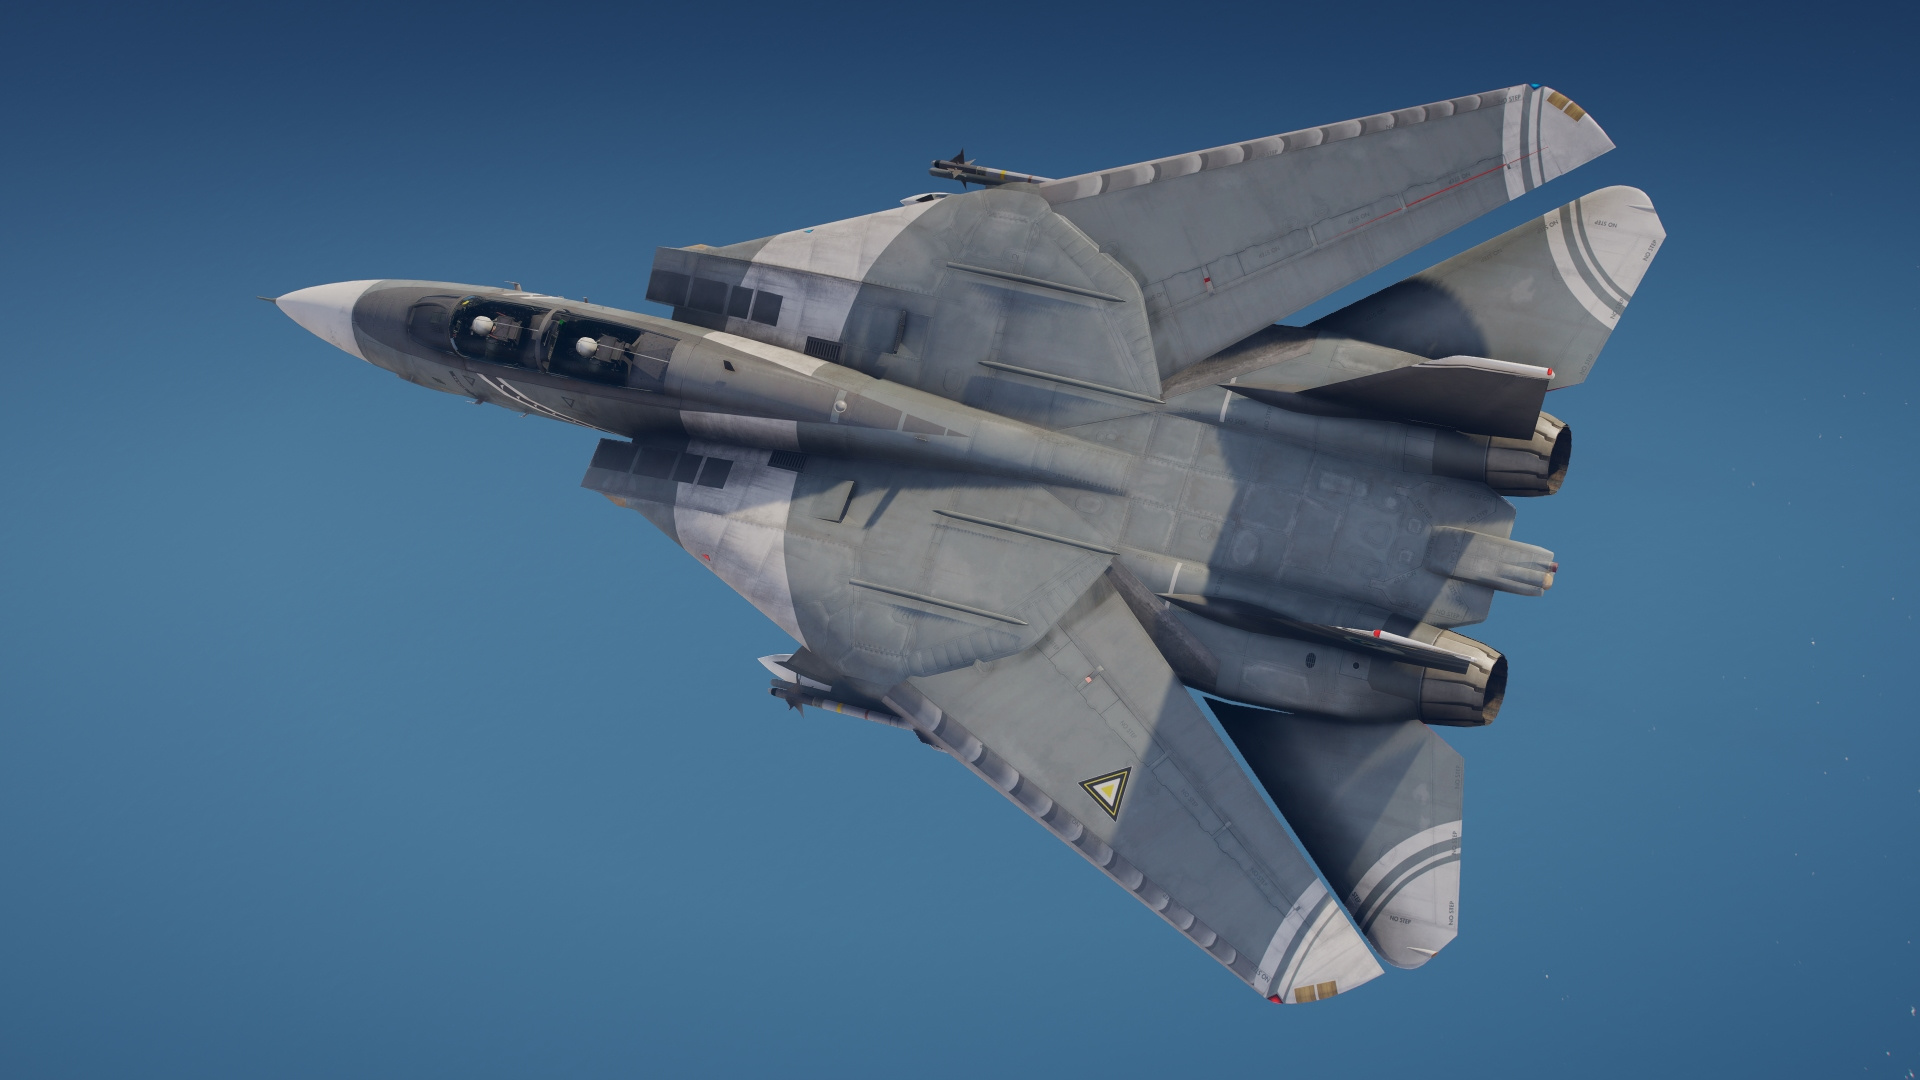 Ace Combat 7: Skies Unknown Trigger package [Add-On] - GTA5-Mods.com